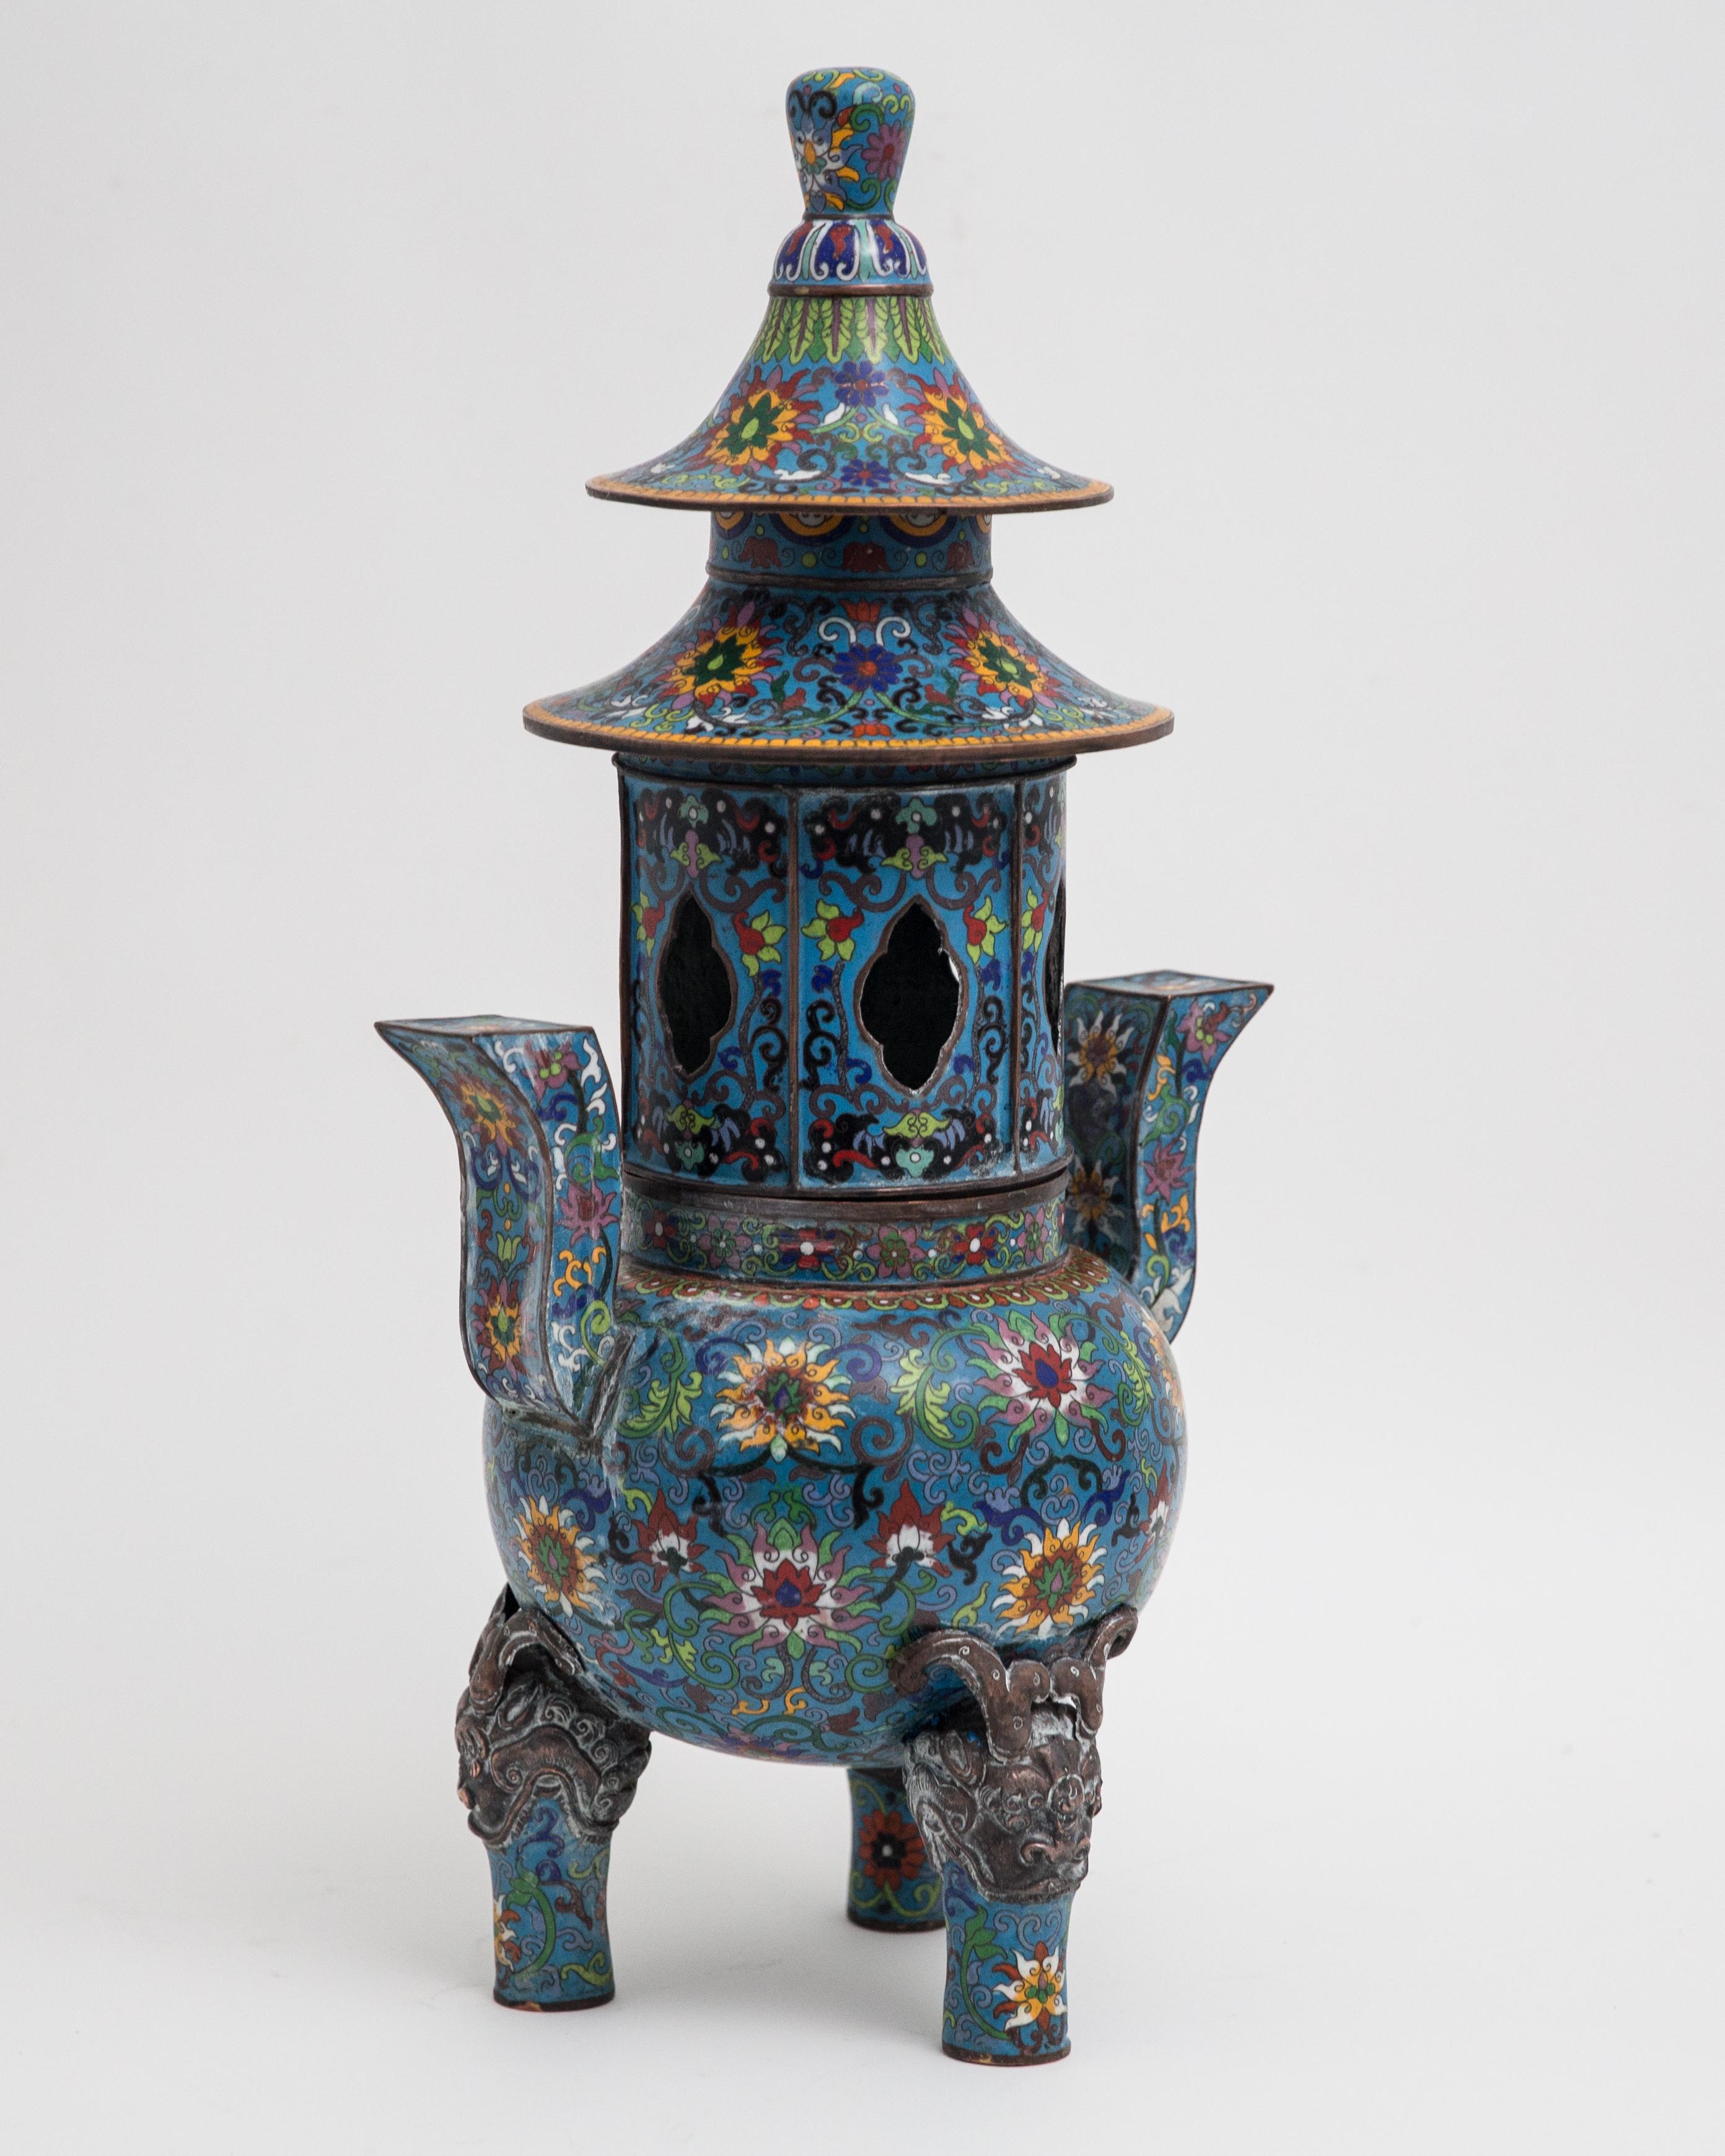 Offered is an impressive tall two part Chinese incense burner in the form of a pagoda. The cloisonné is in good condition. The pagoda stands approximately 26” in height. The pagoda top removes and the base is footed with demonic formed temple